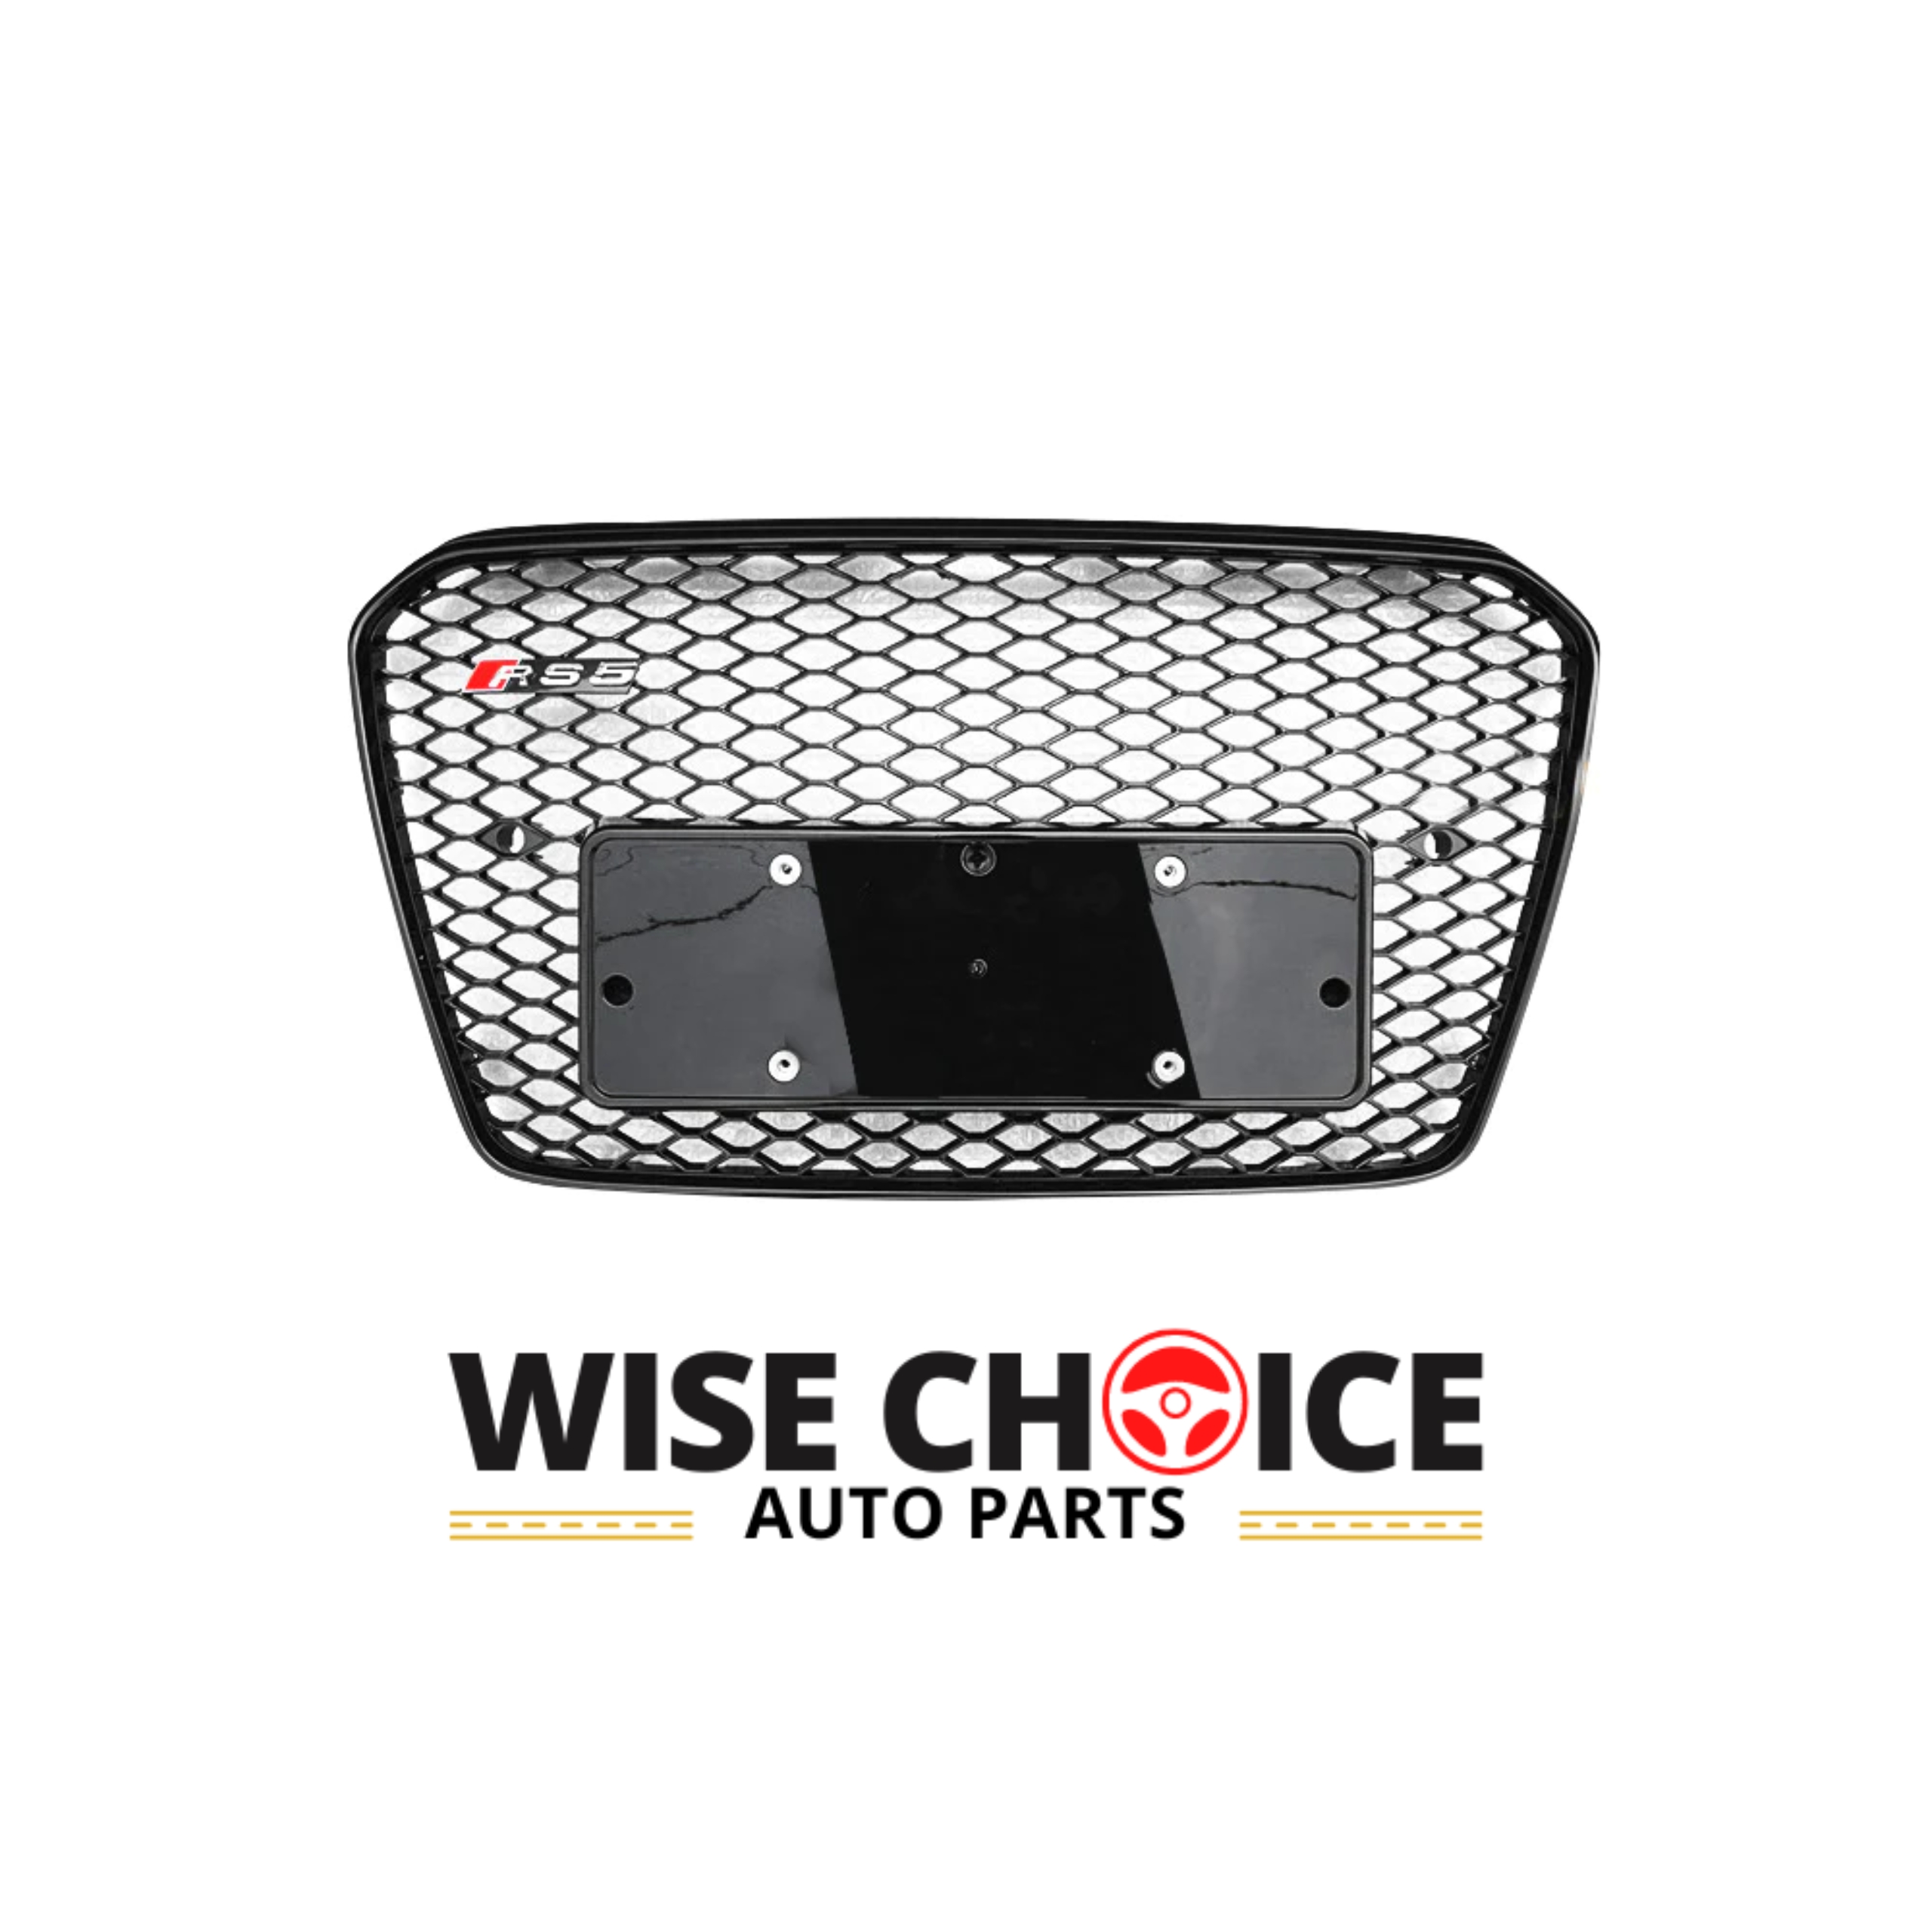 Audi RS5 Honeycomb Front Grille, a high-quality carbon fiber grille upgrade for B8.5 A5/S5 models (2013-2016)